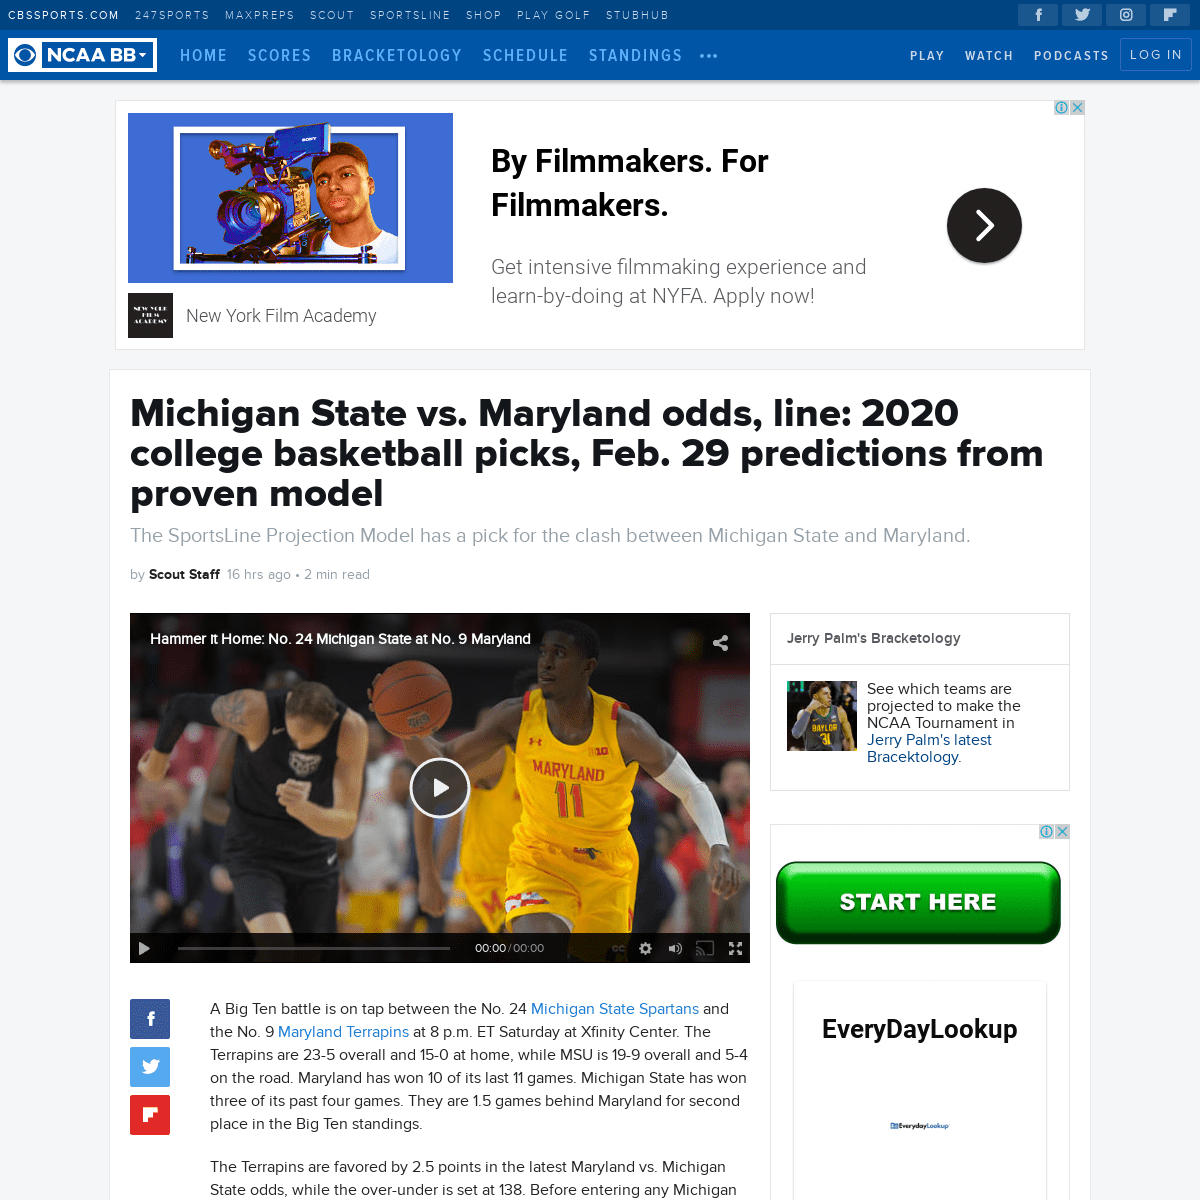 A complete backup of www.cbssports.com/college-basketball/news/michigan-state-vs-maryland-odds-line-2020-college-basketball-pick